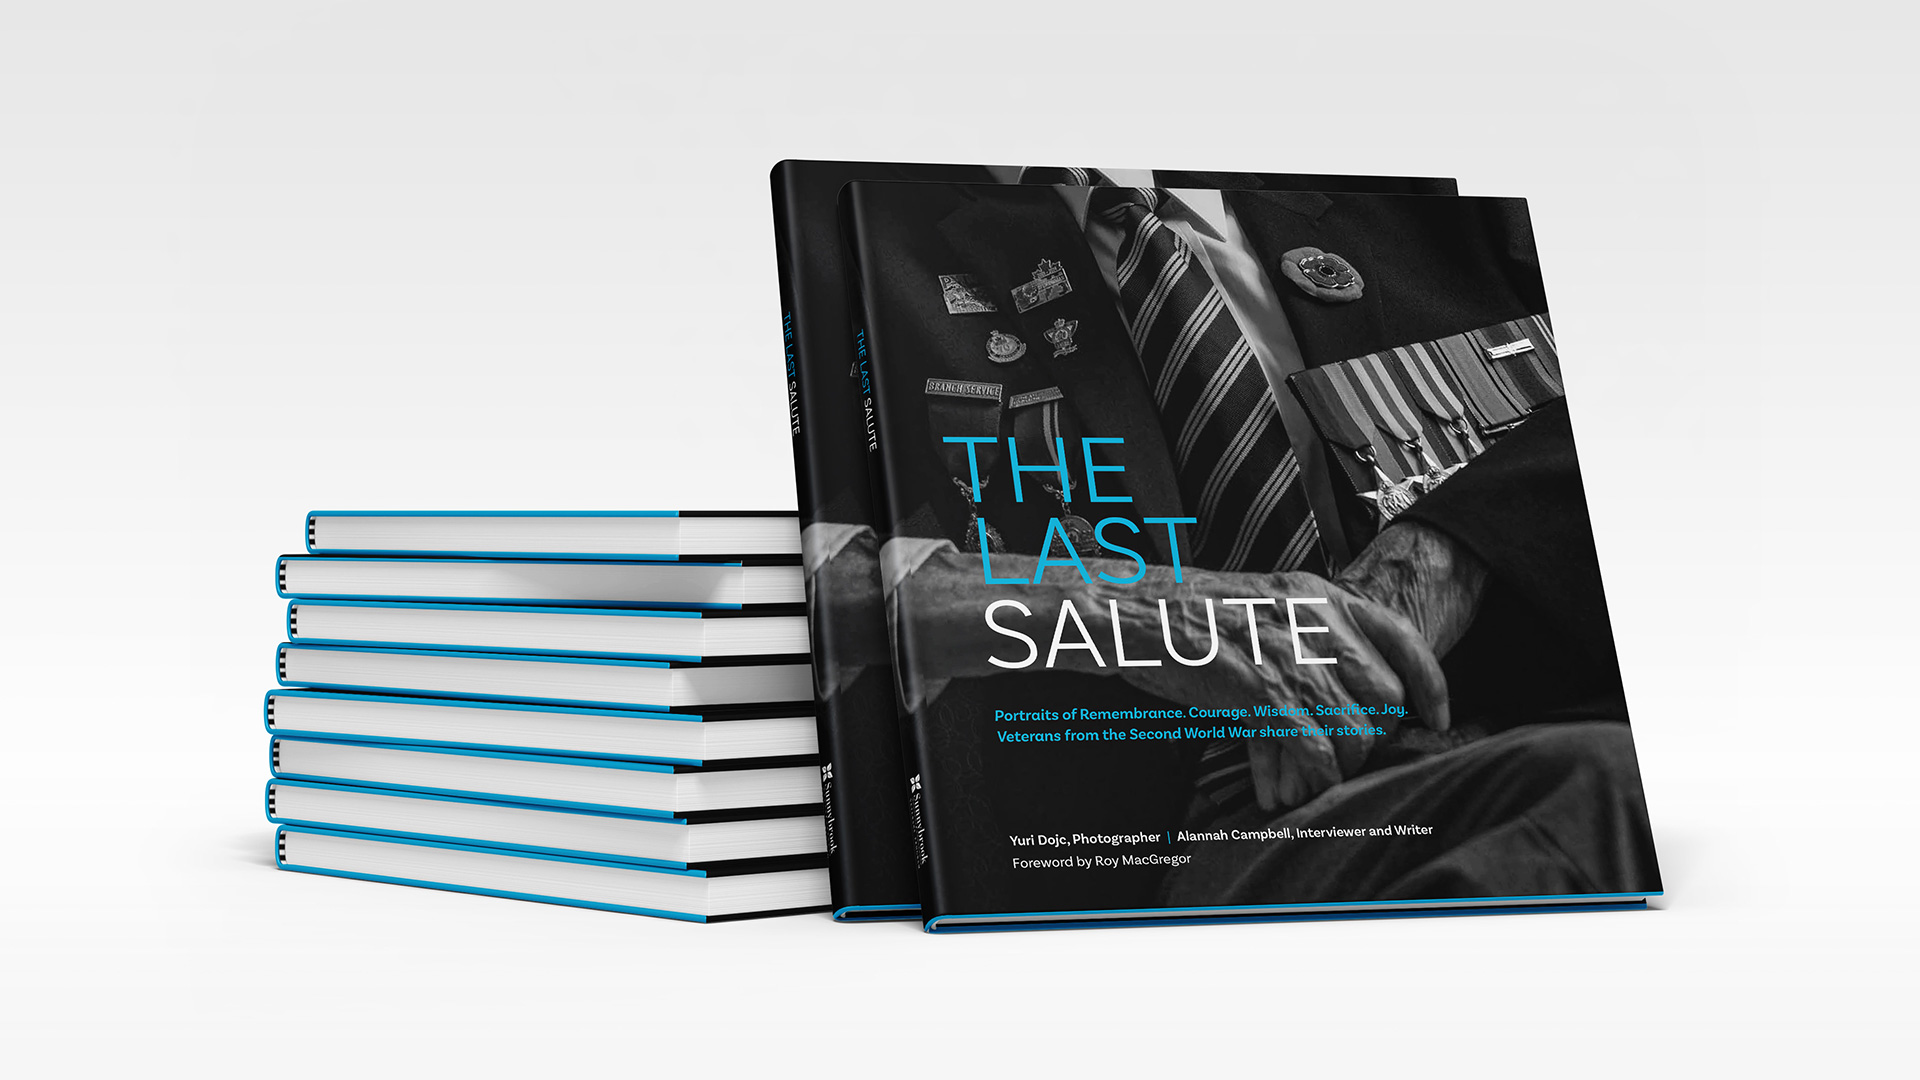 The Last Salute art book celebrates Canada's oldest Veterans from